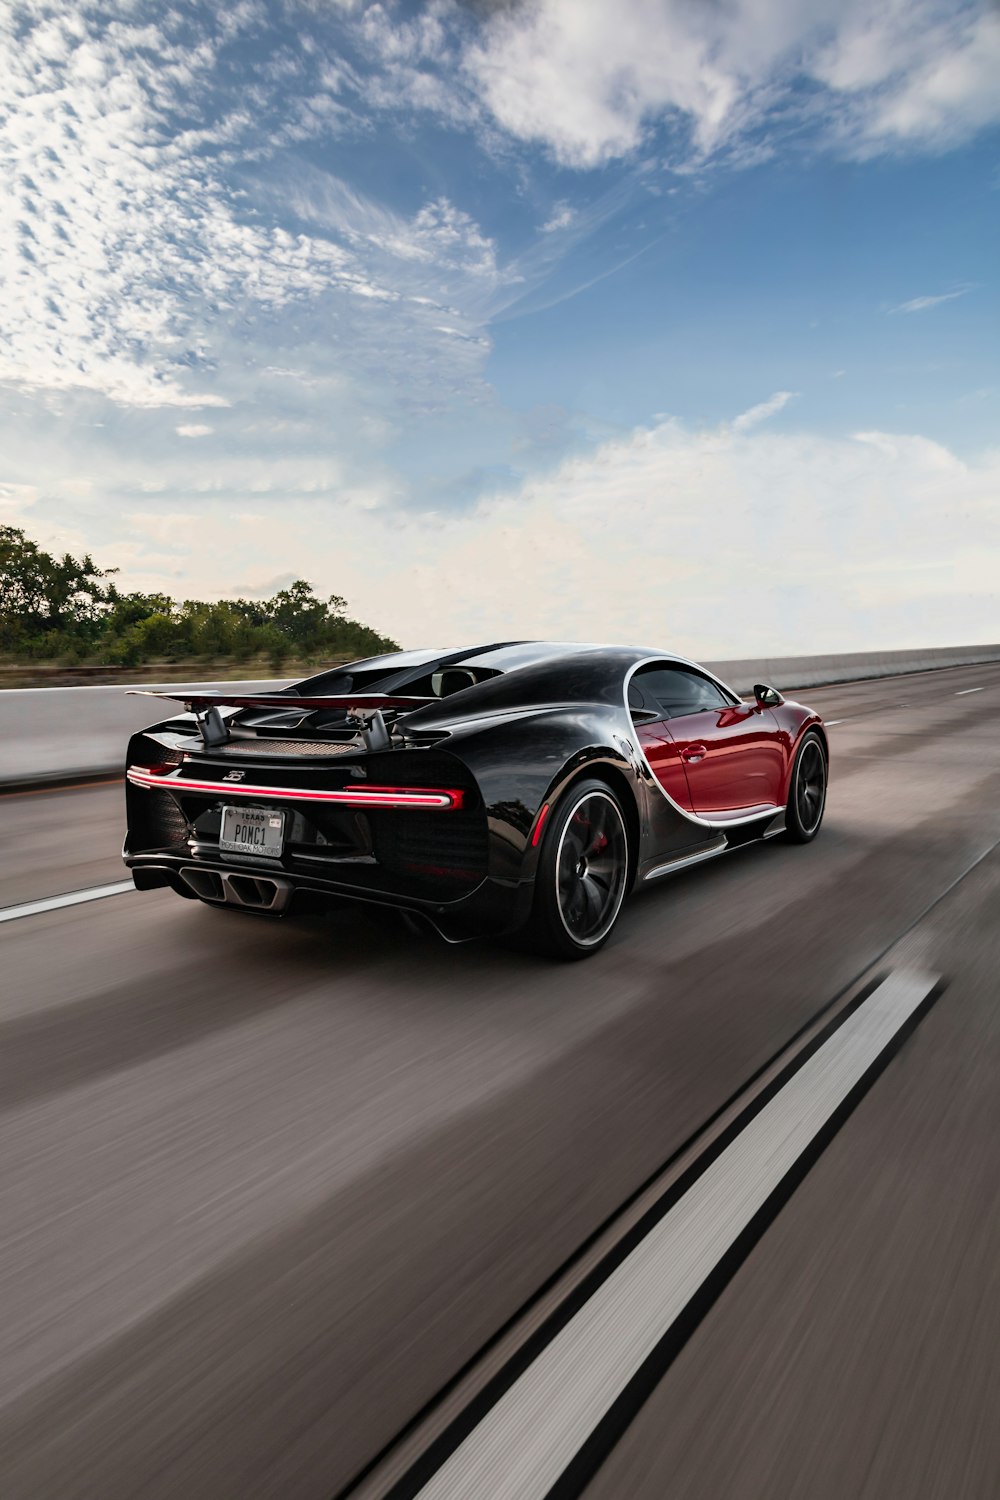 a black and red sports car driving down the road